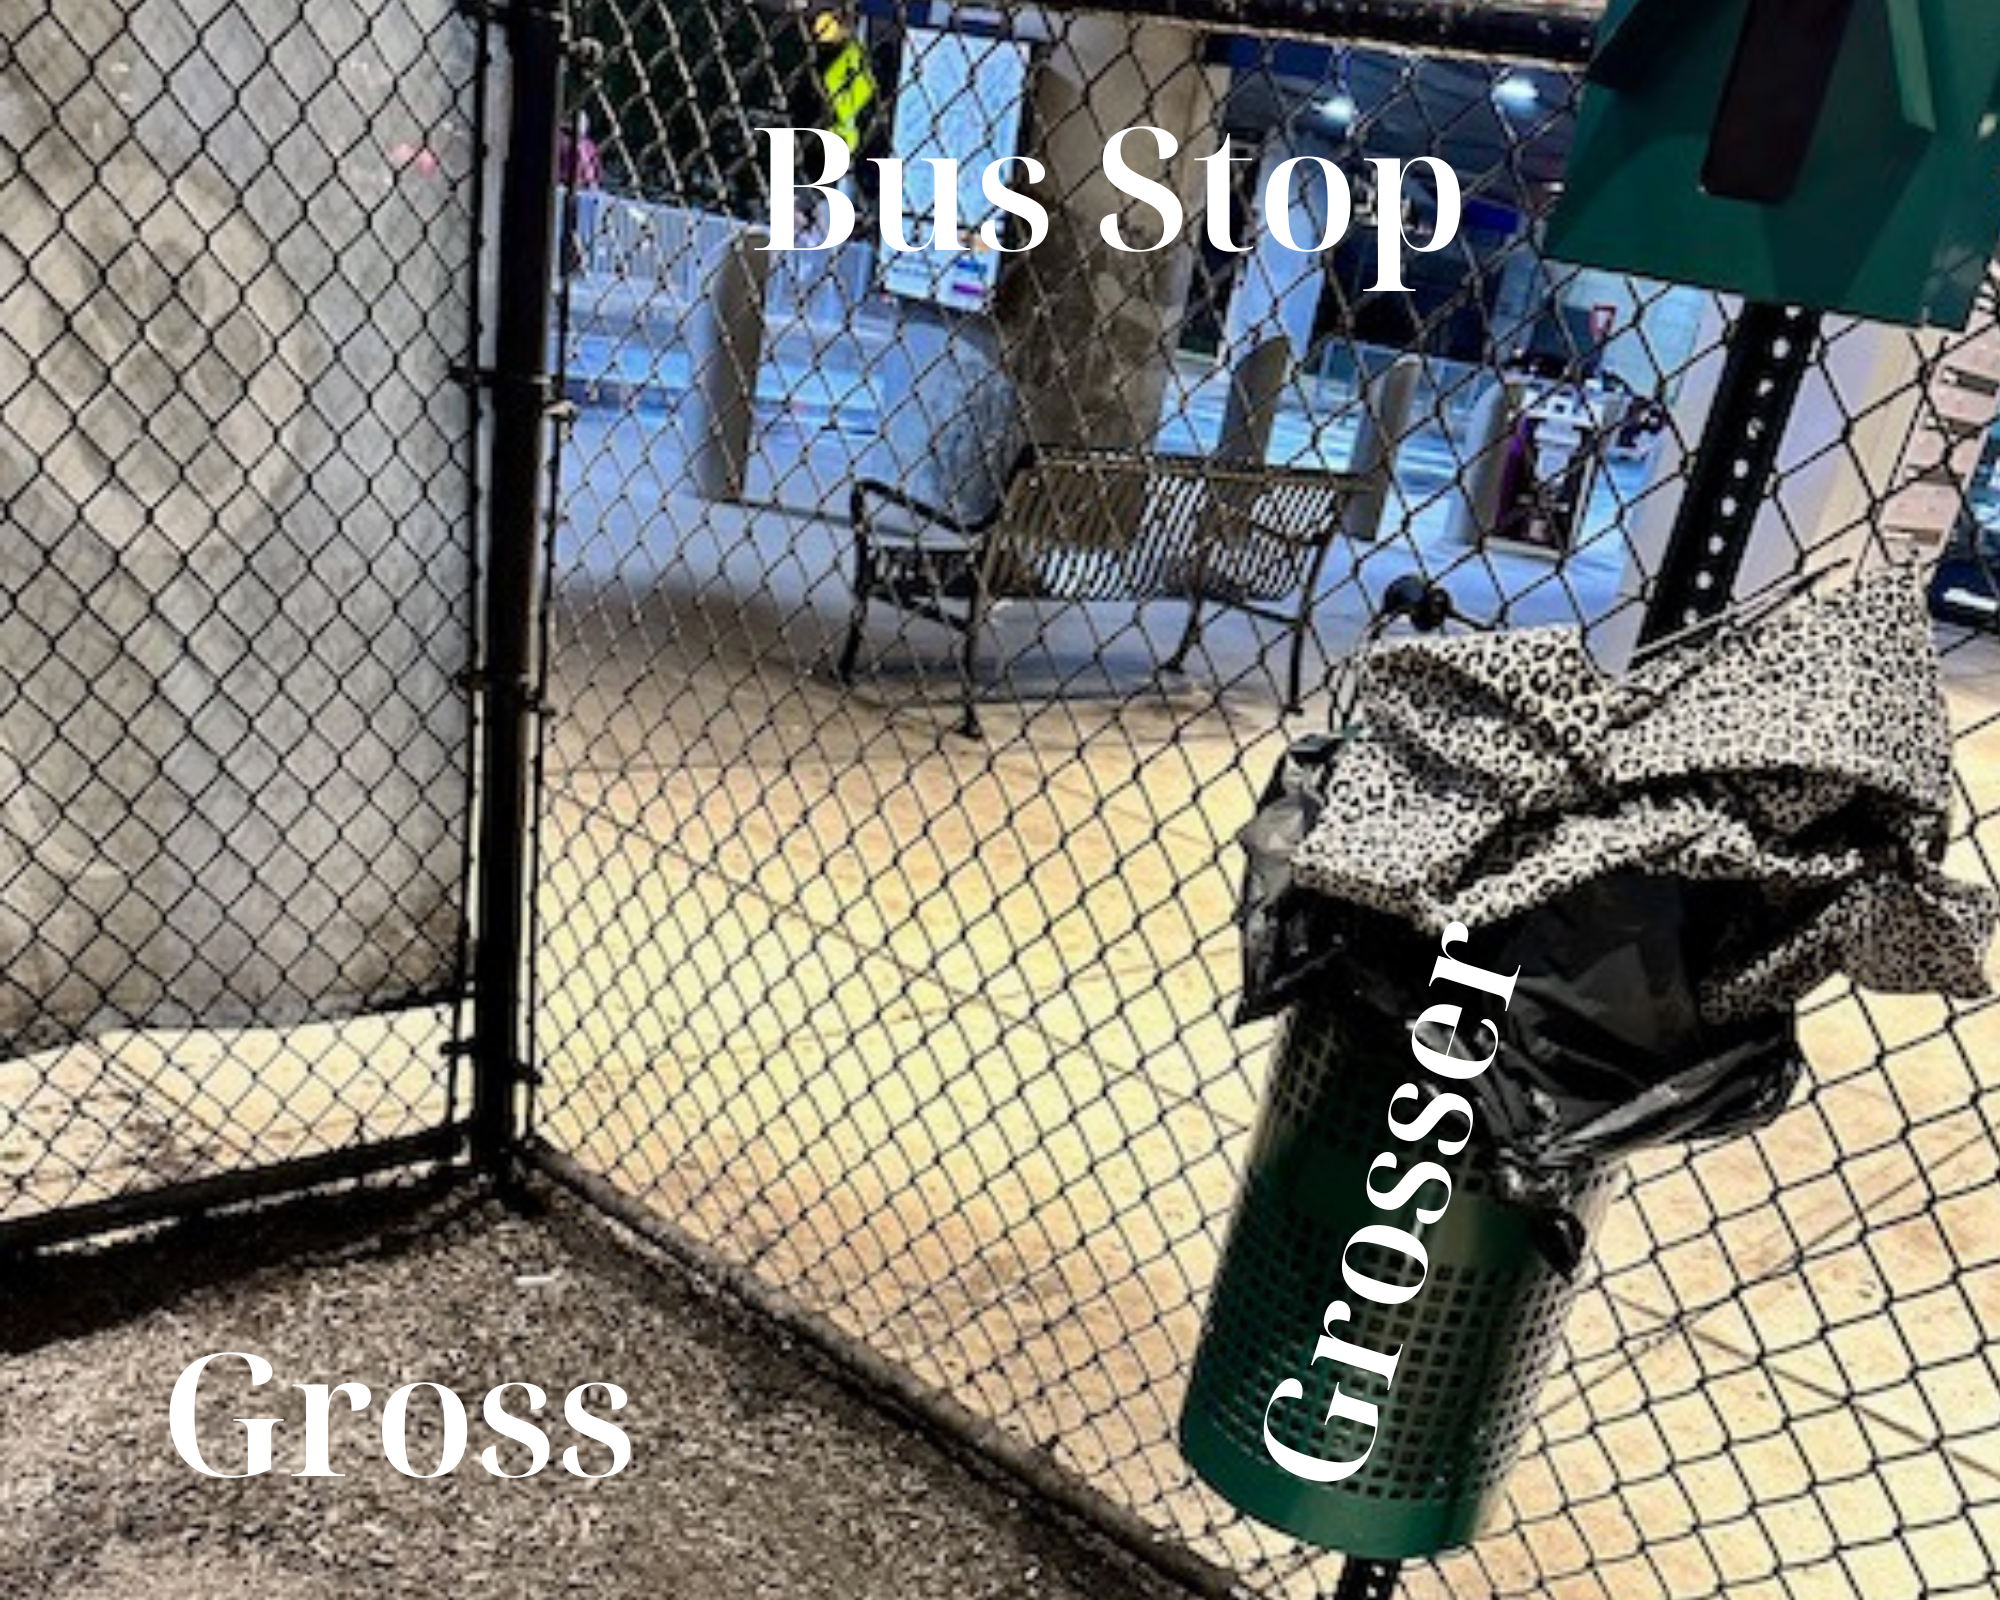 Boston Logan Pet Relief area with bus stop and gross conditions marked with text